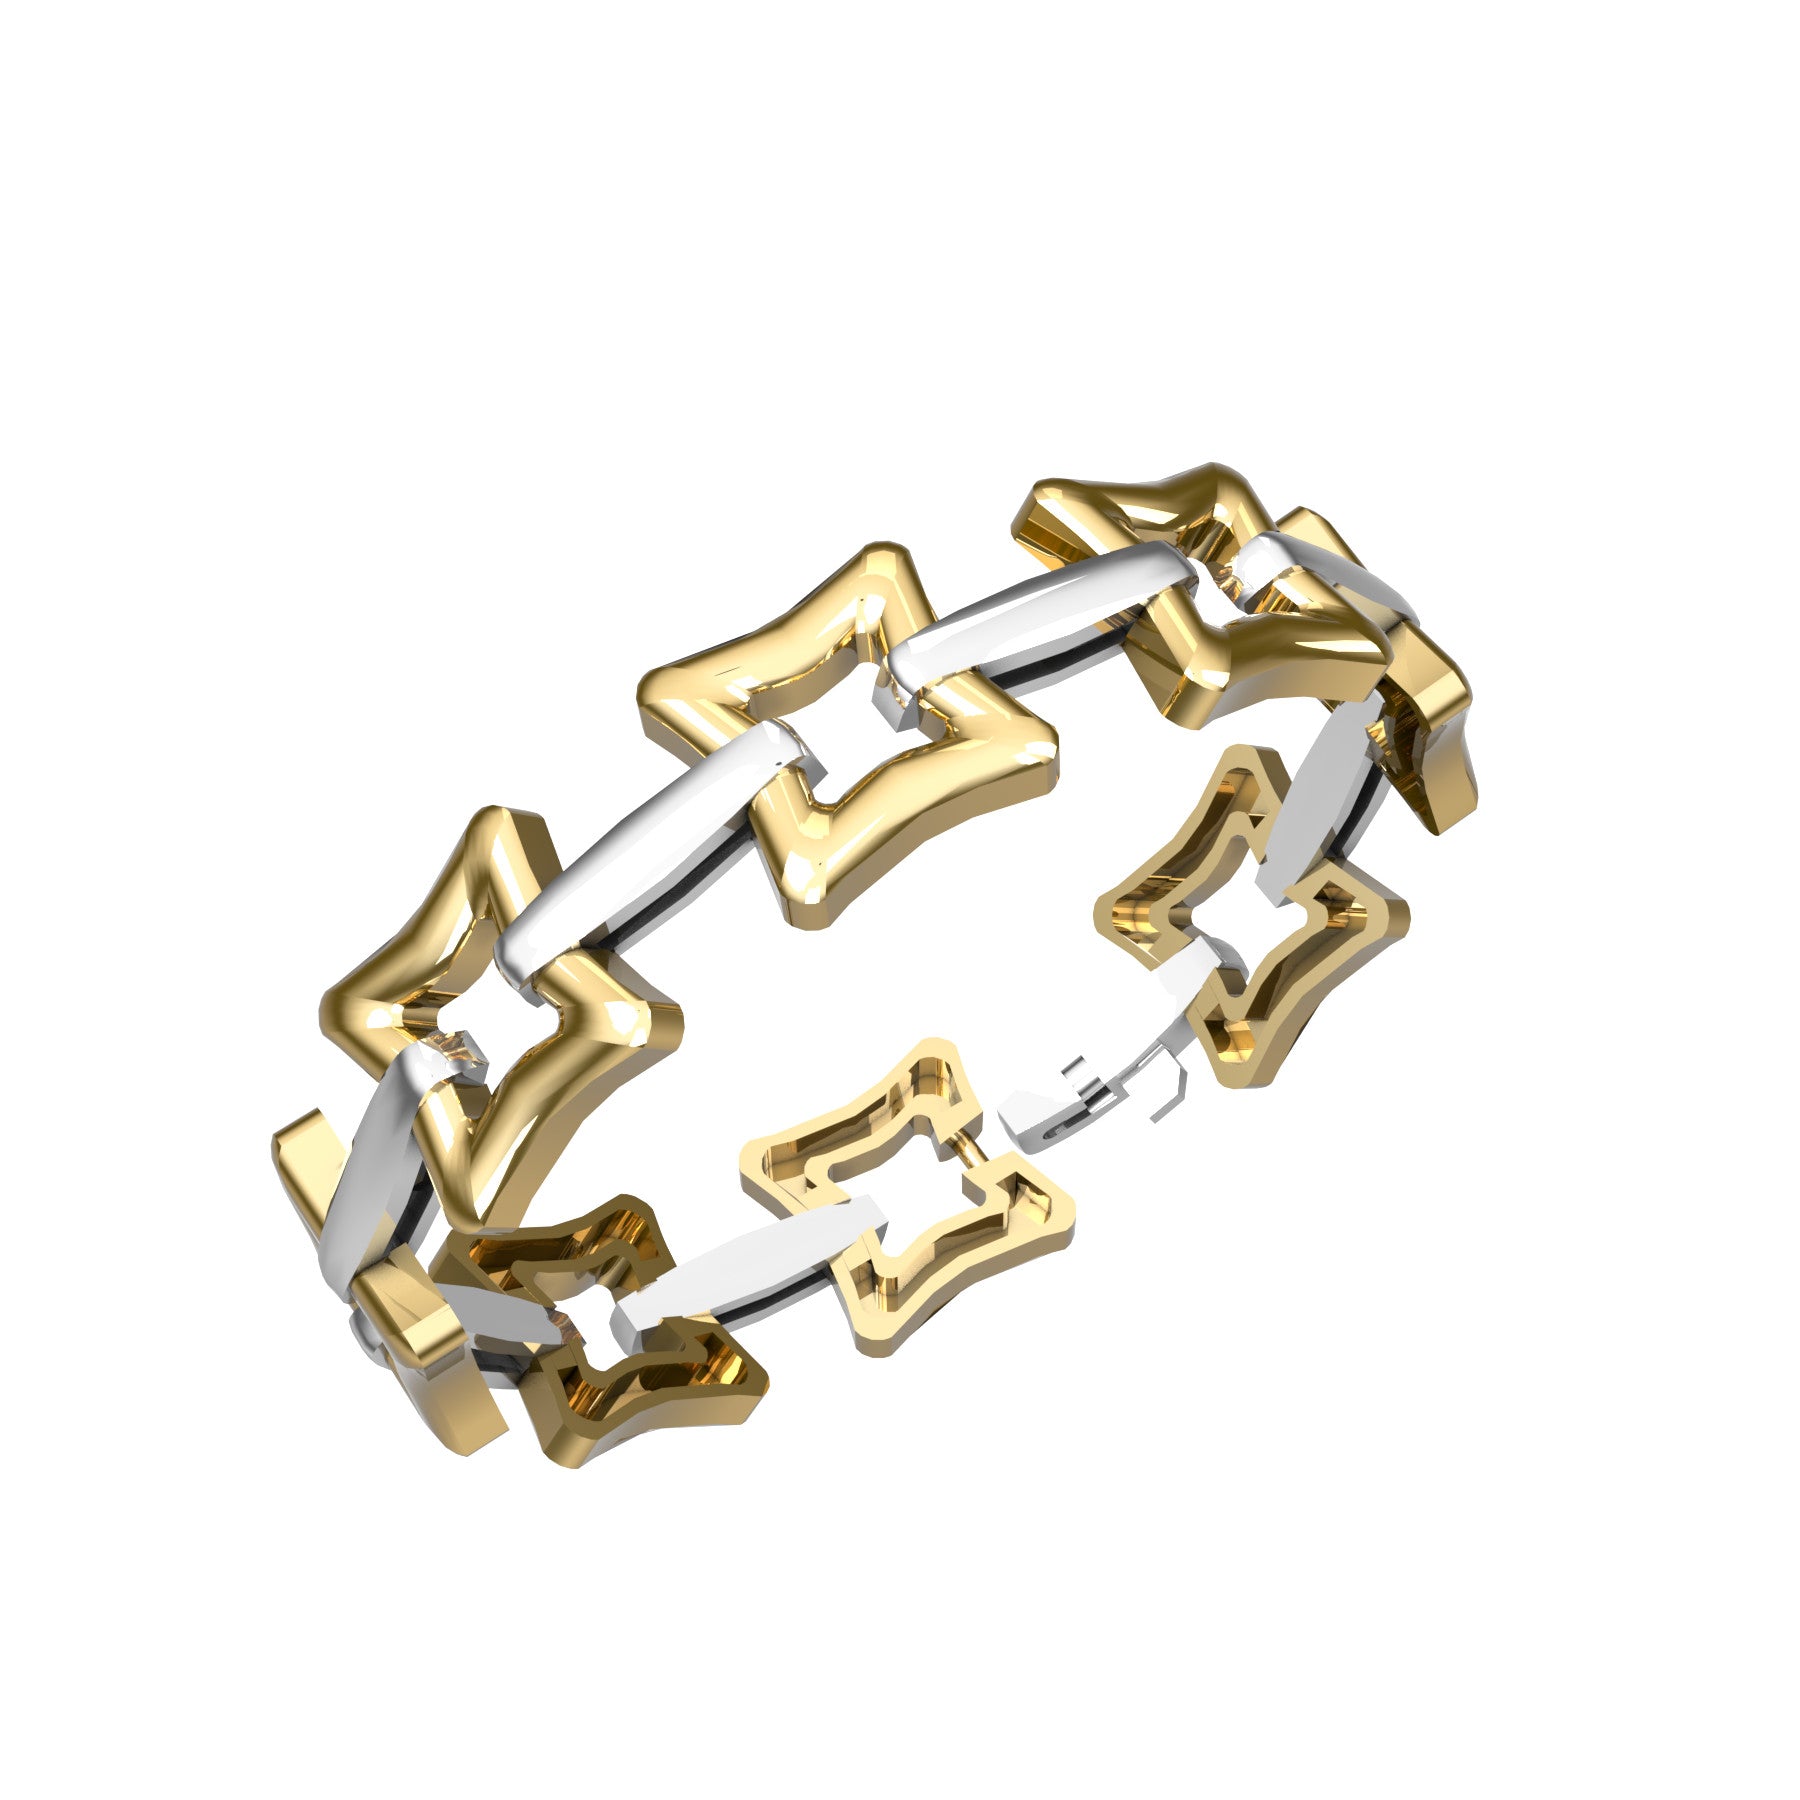 beveled square link bracelet, 18 K yellow and white gold, width 13 mm